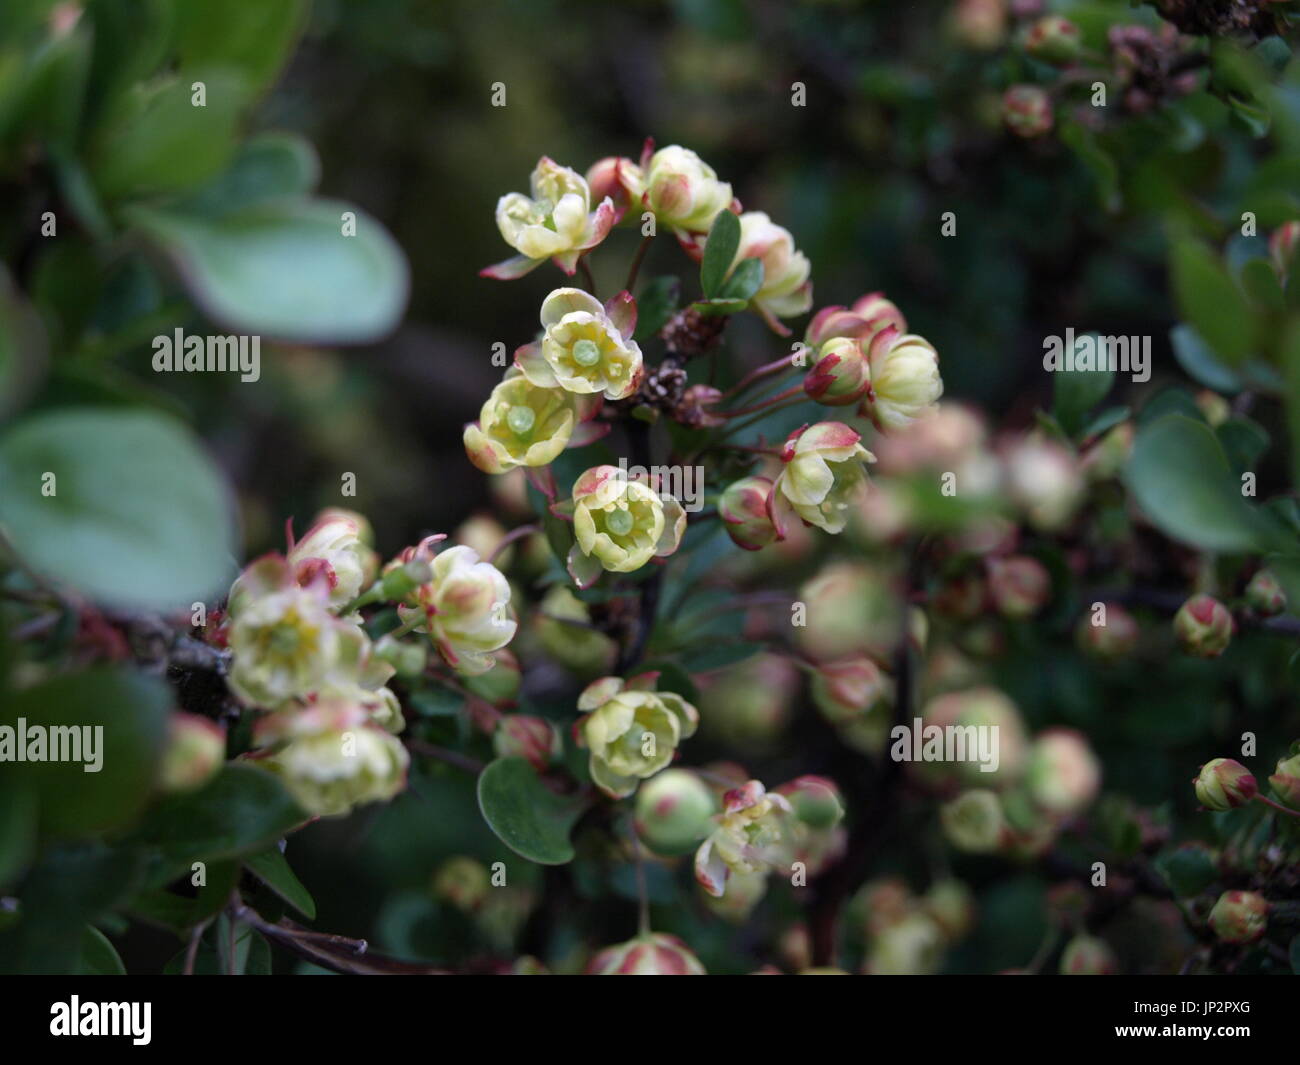 A spiny berberis thunbergii or Japanese barberry shrub displays its tiny but beautiful pale pastel pink, cream and green clusters of flowers. Stock Photo